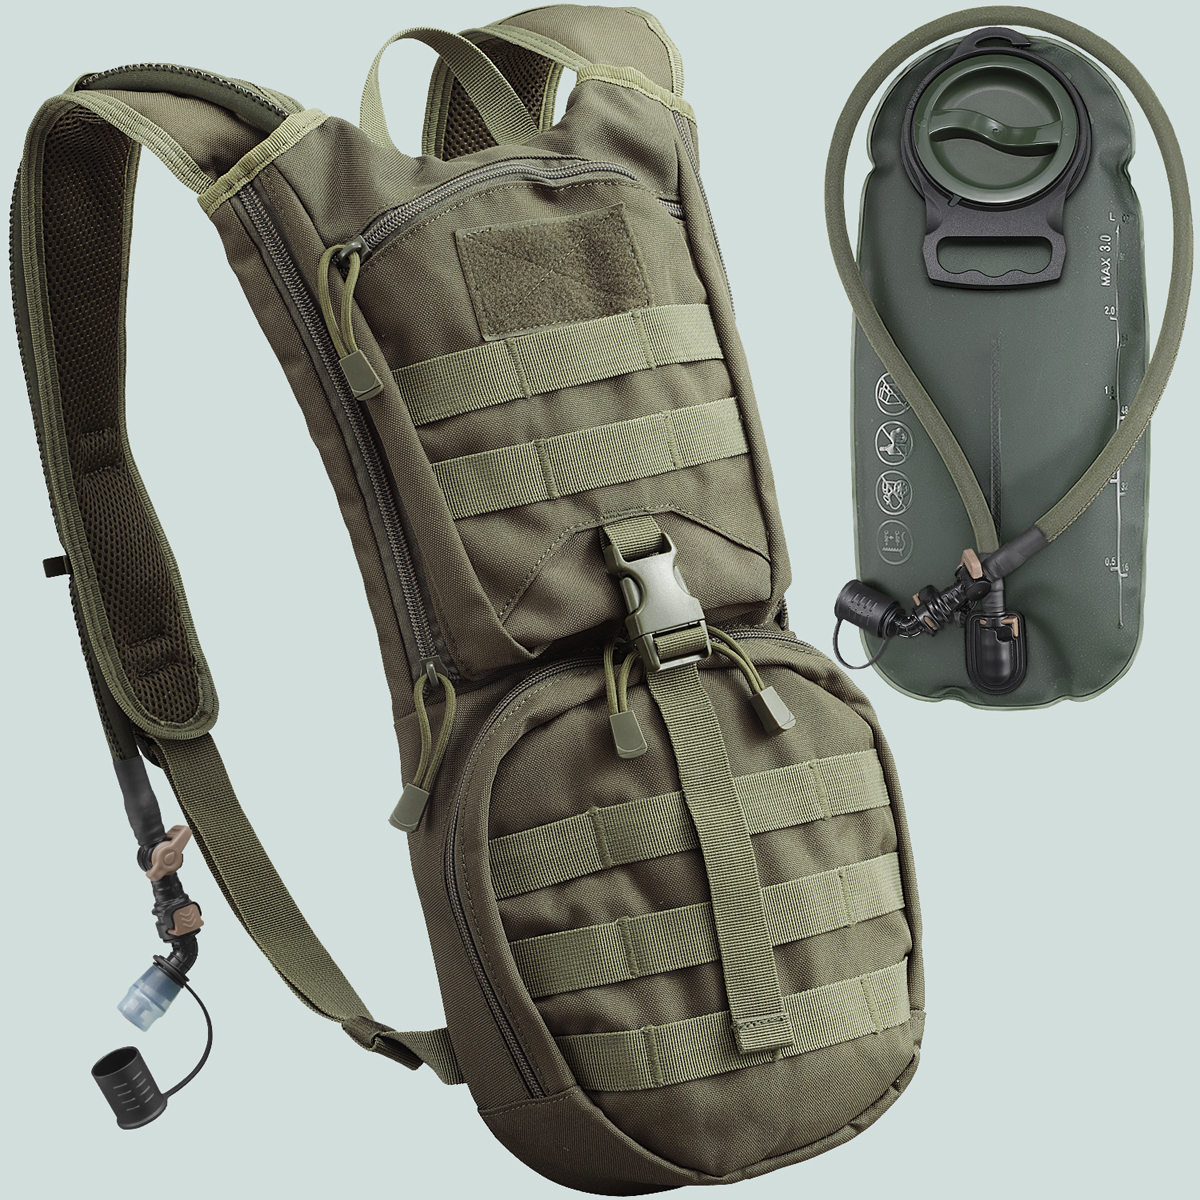 KAMUI Hydration Backpack- blocksy content